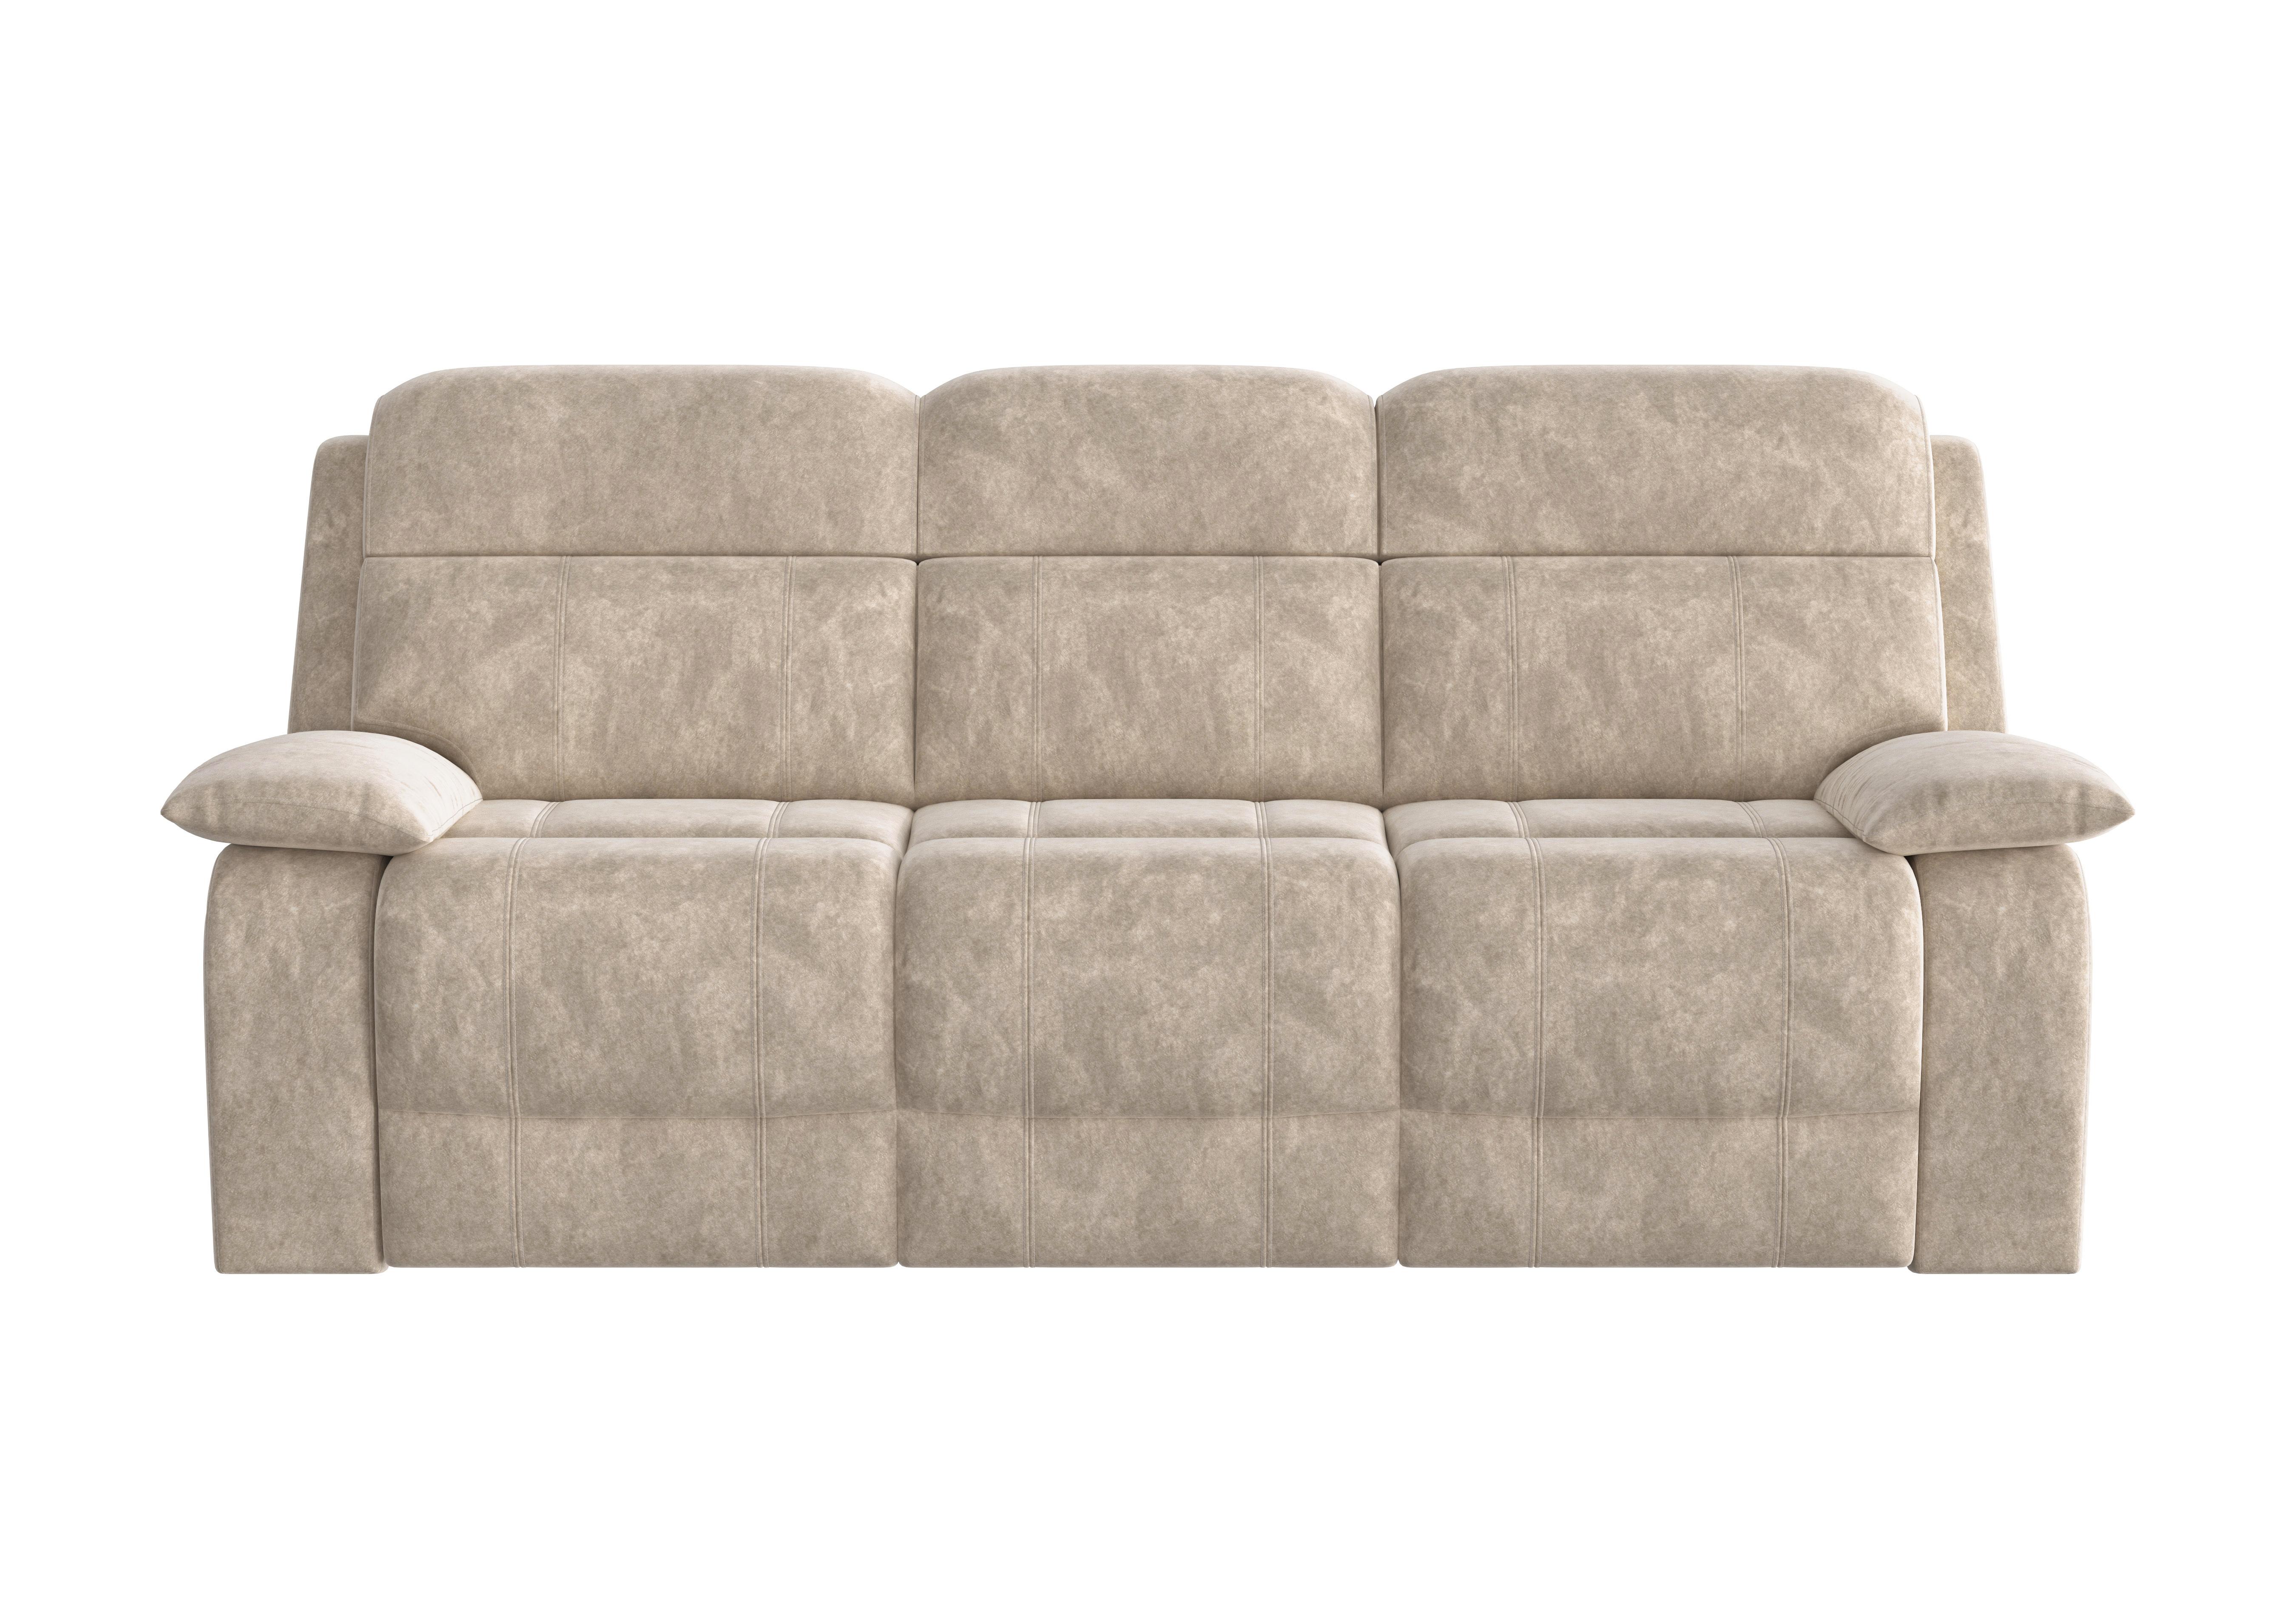 Moreno 3 Seater Fabric Power Recliner Sofa with Power Headrests in Bfa-Bnn-R26 Cream on Furniture Village